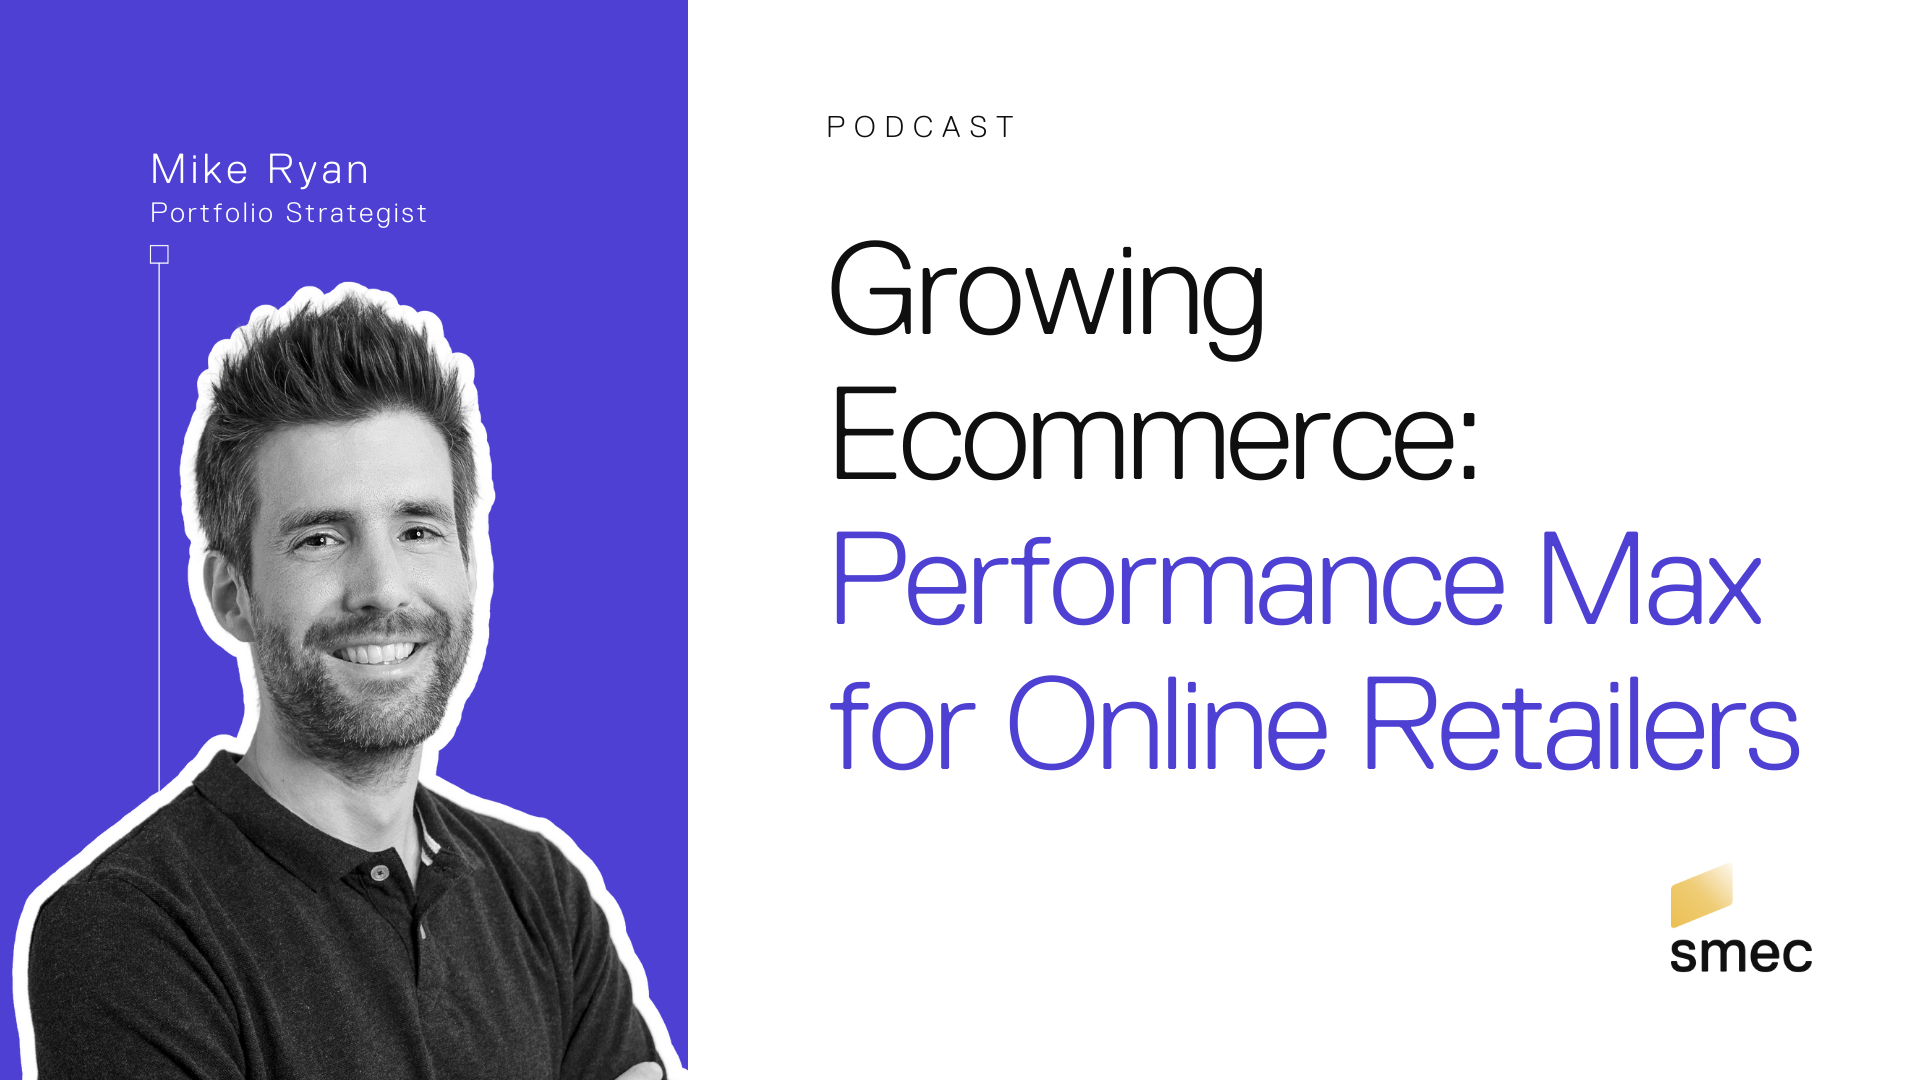 Banner for podcast episode no 19 "Performnace Max for Online Retailers" with Mike Ryan